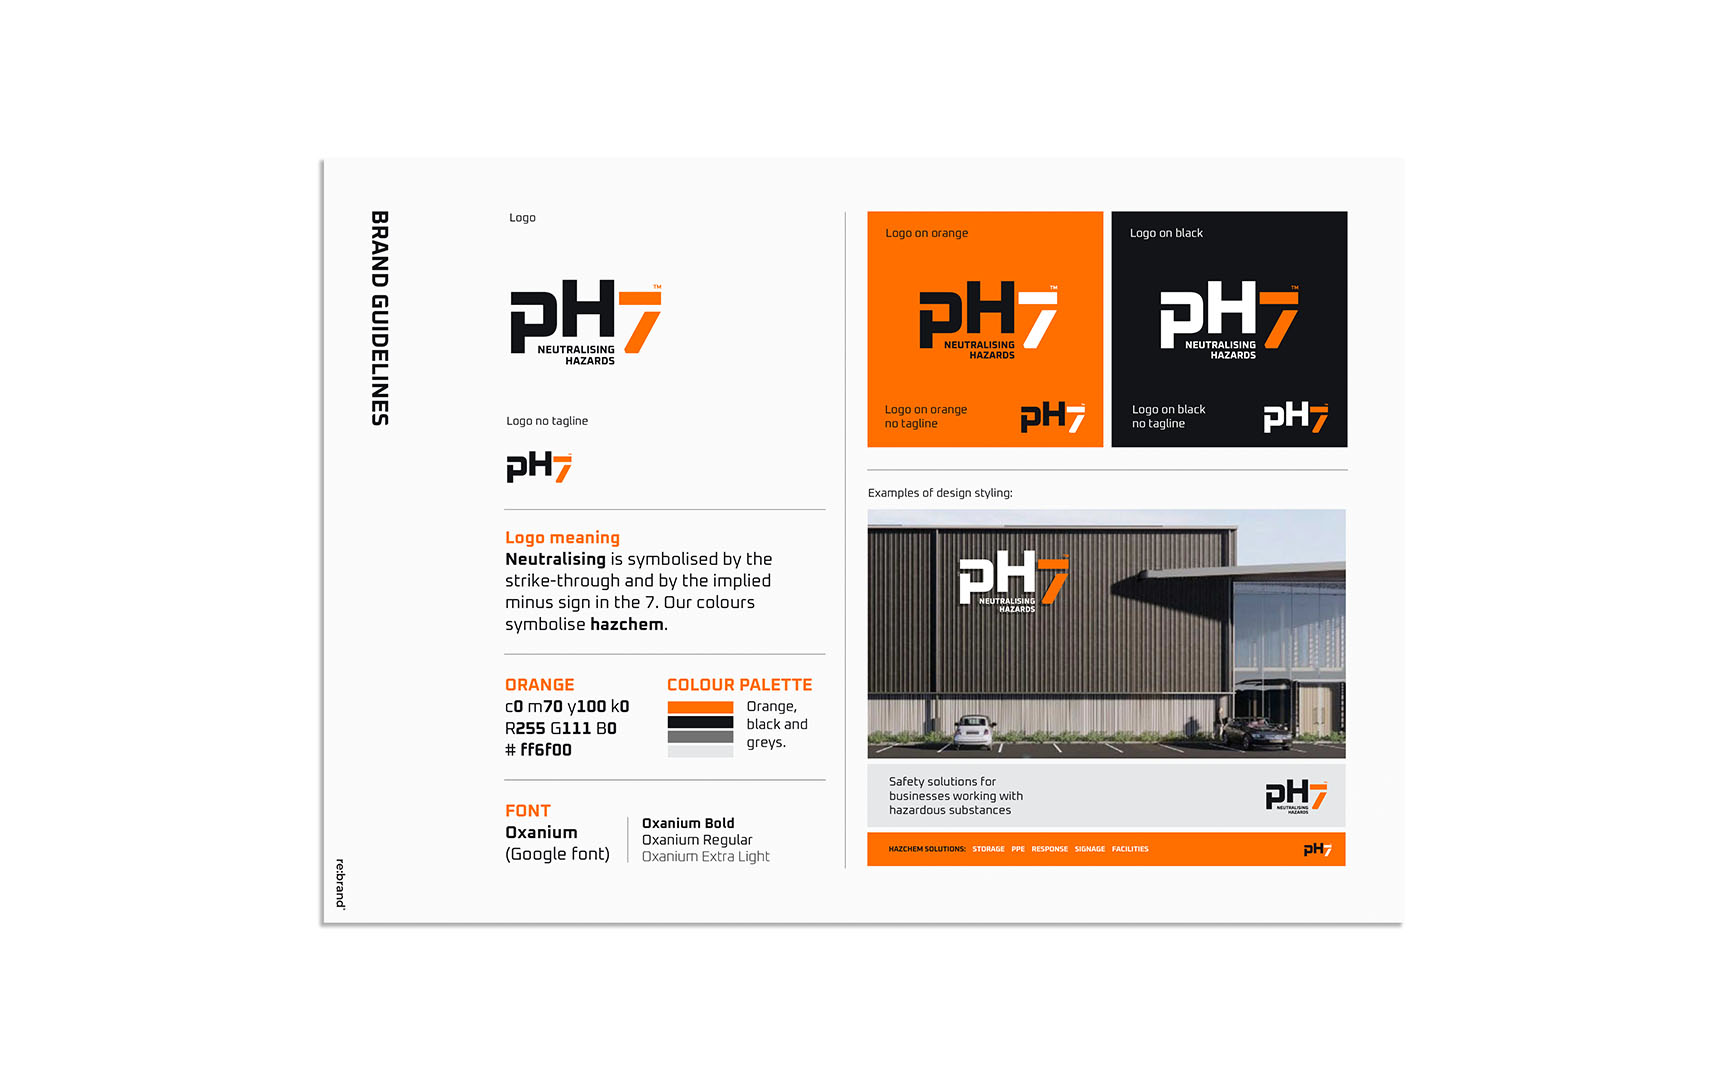 PH7 - Brand guidelines